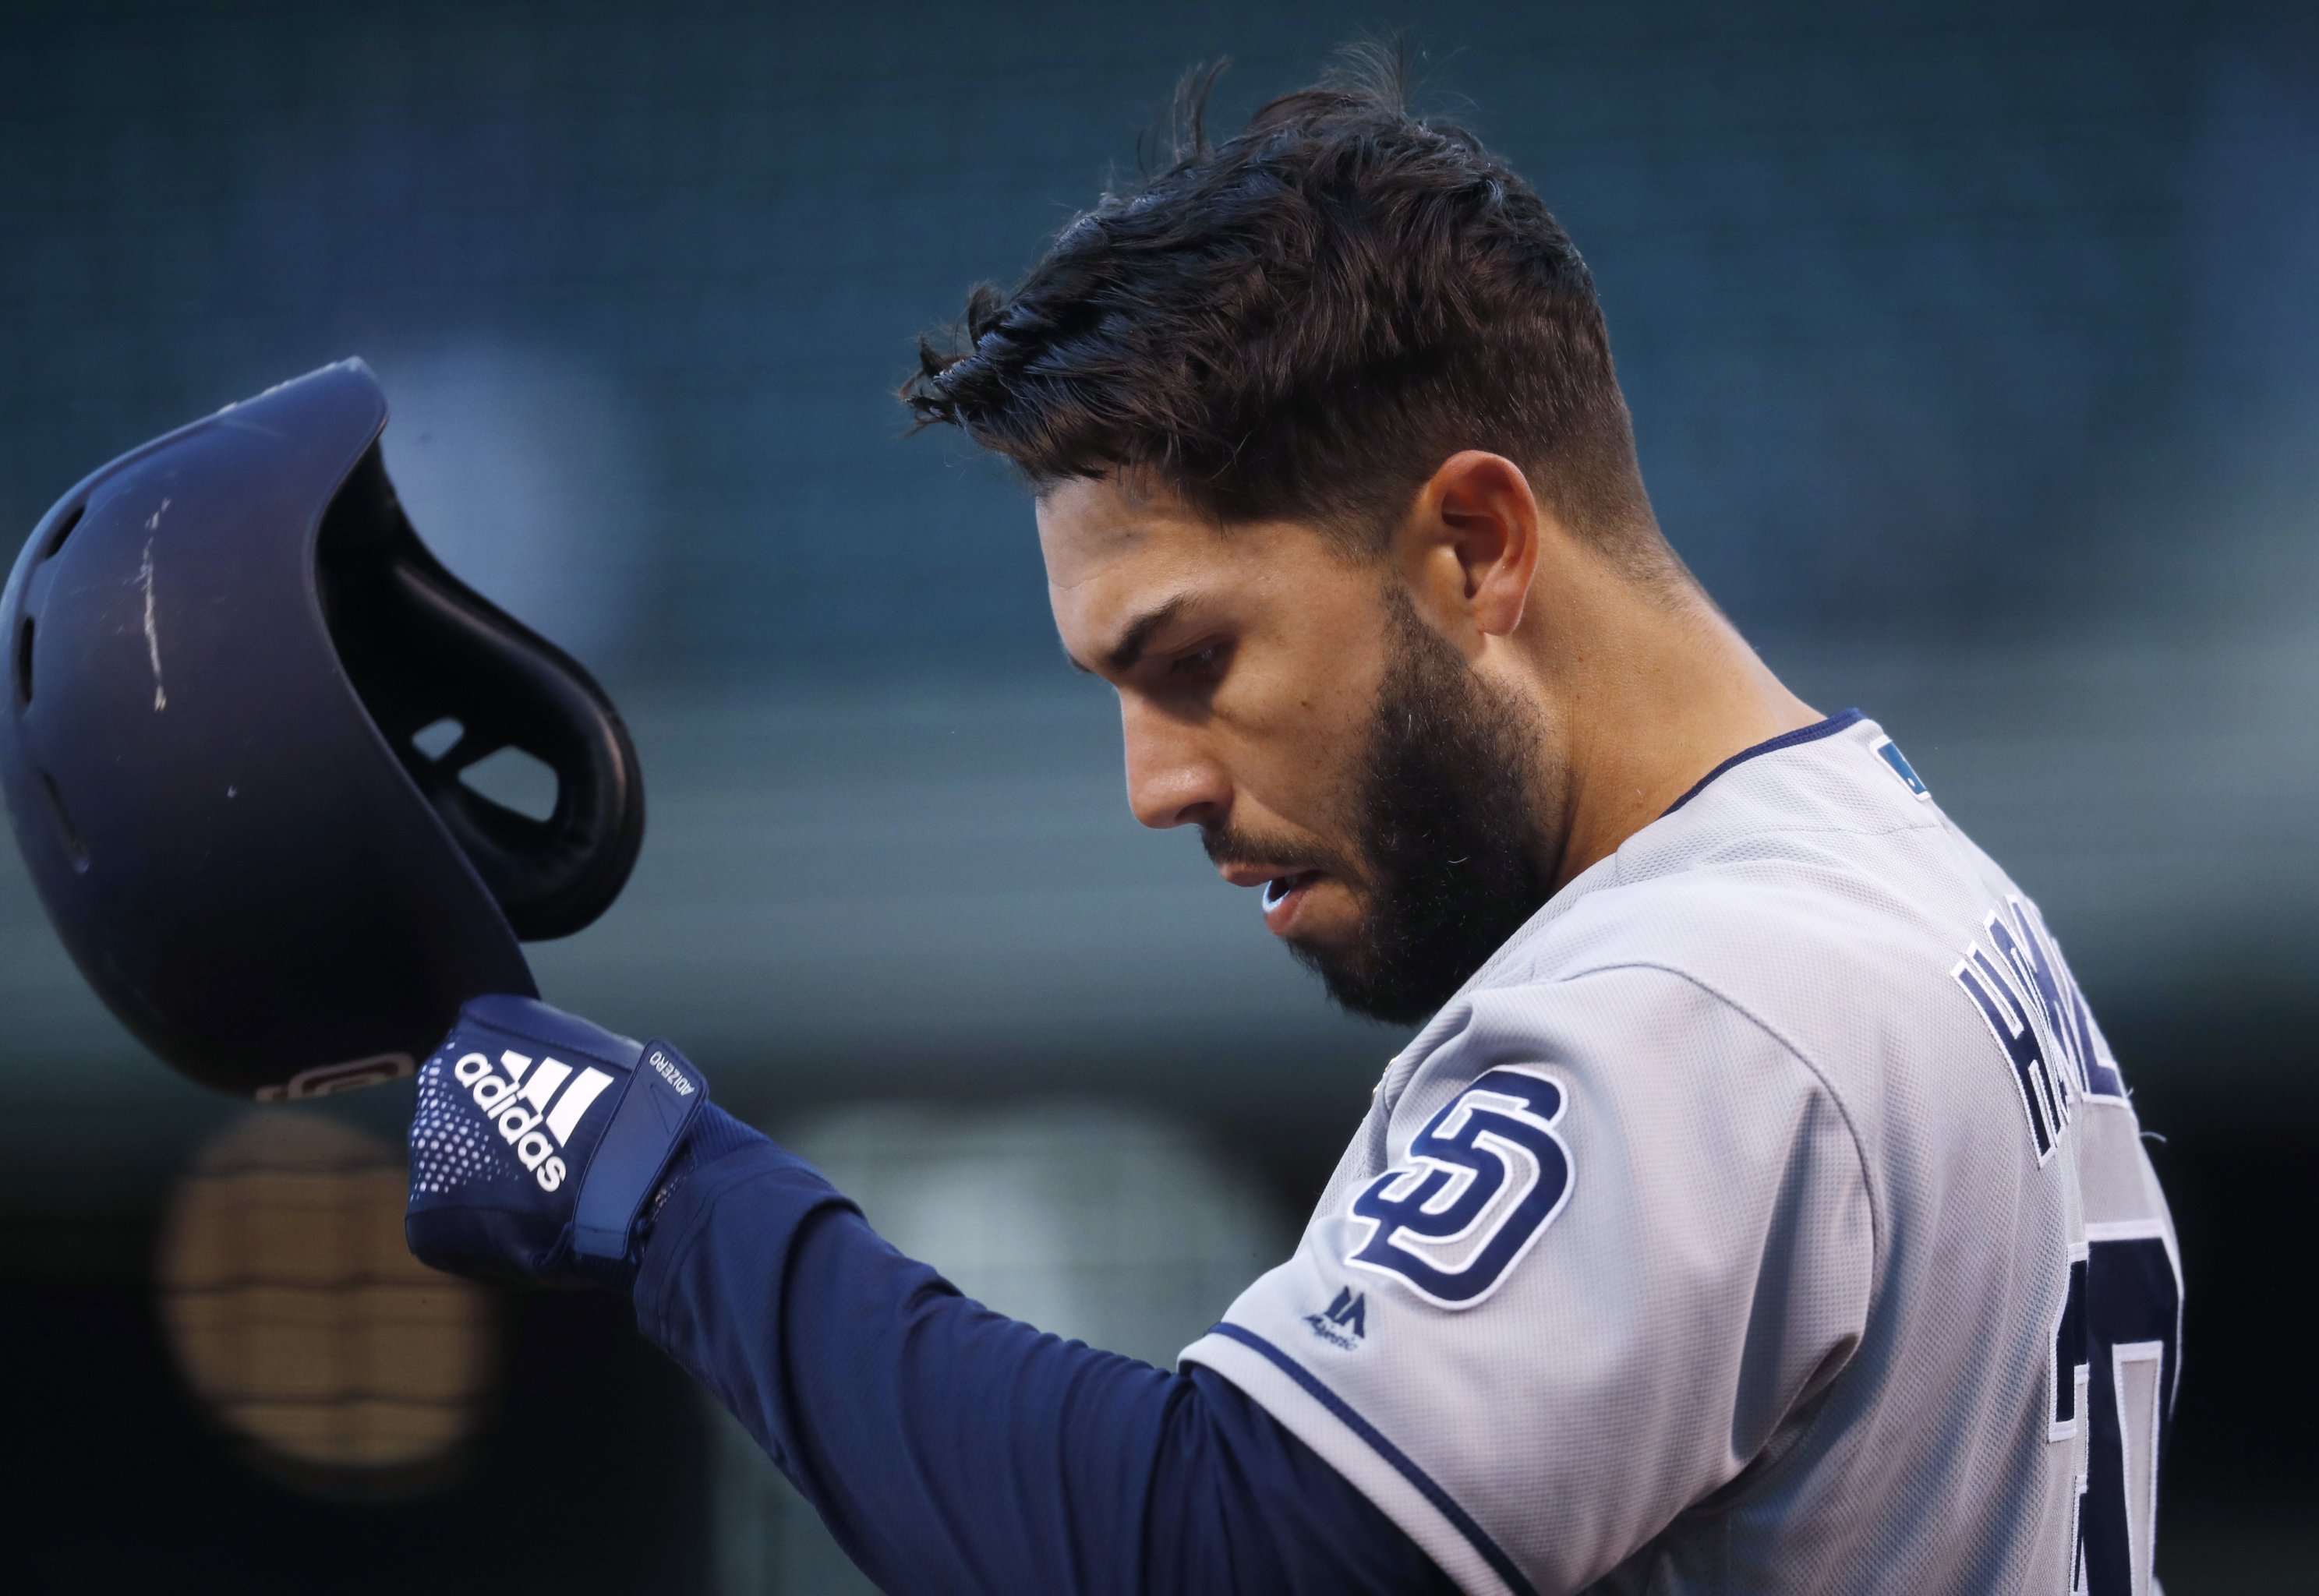 Eric Hosmer signs 8-year, $144 million deal with Padres, per